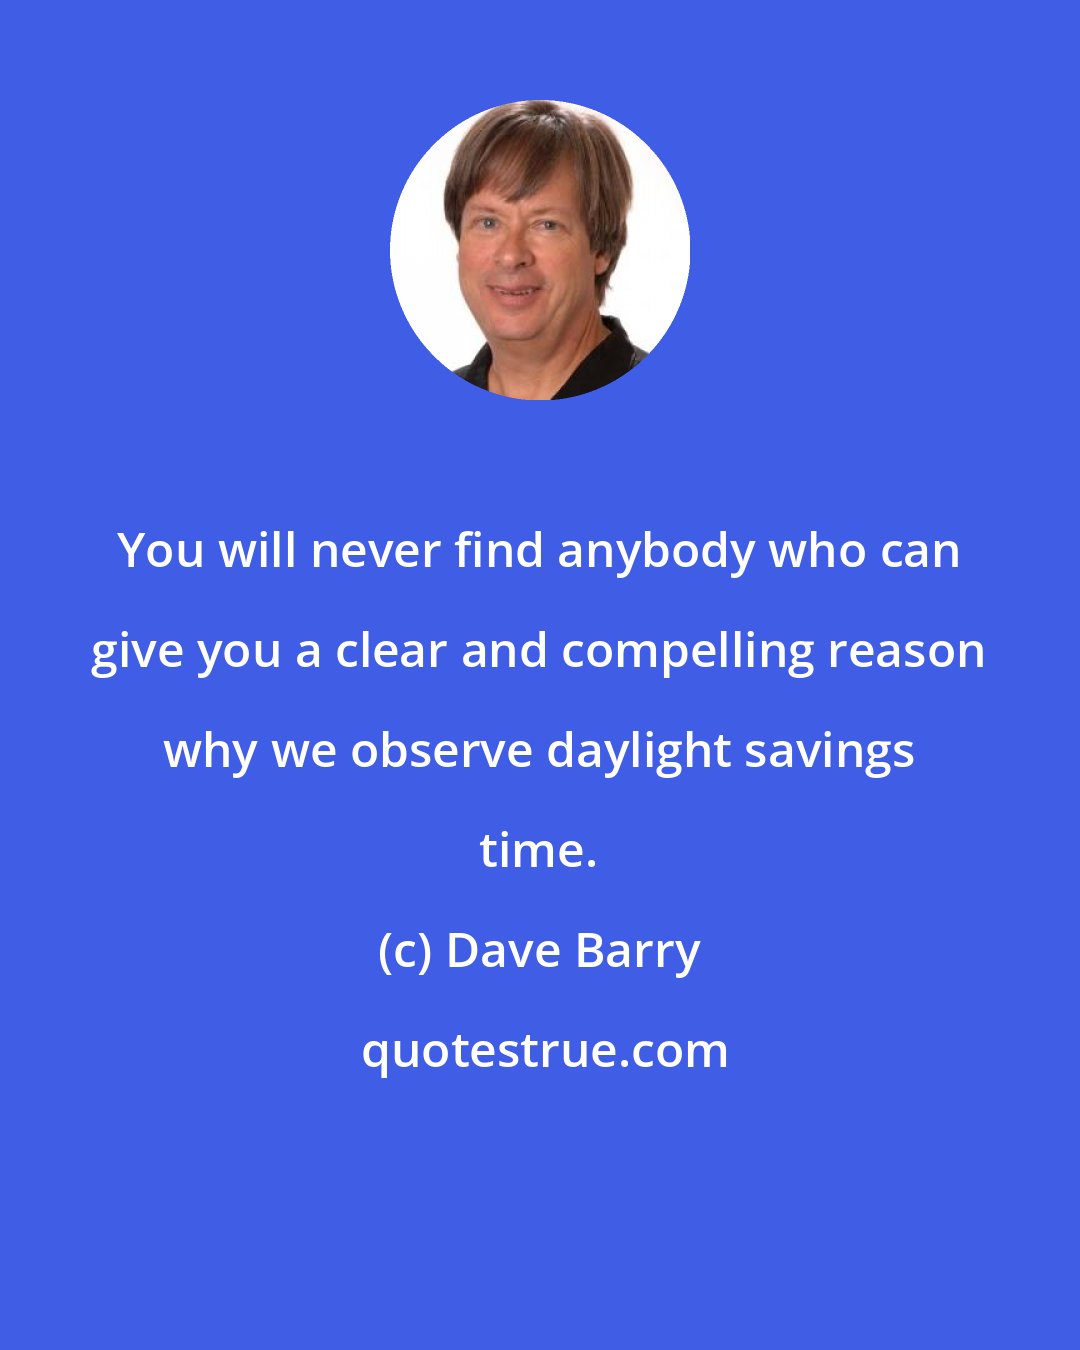 Dave Barry: You will never find anybody who can give you a clear and compelling reason why we observe daylight savings time.